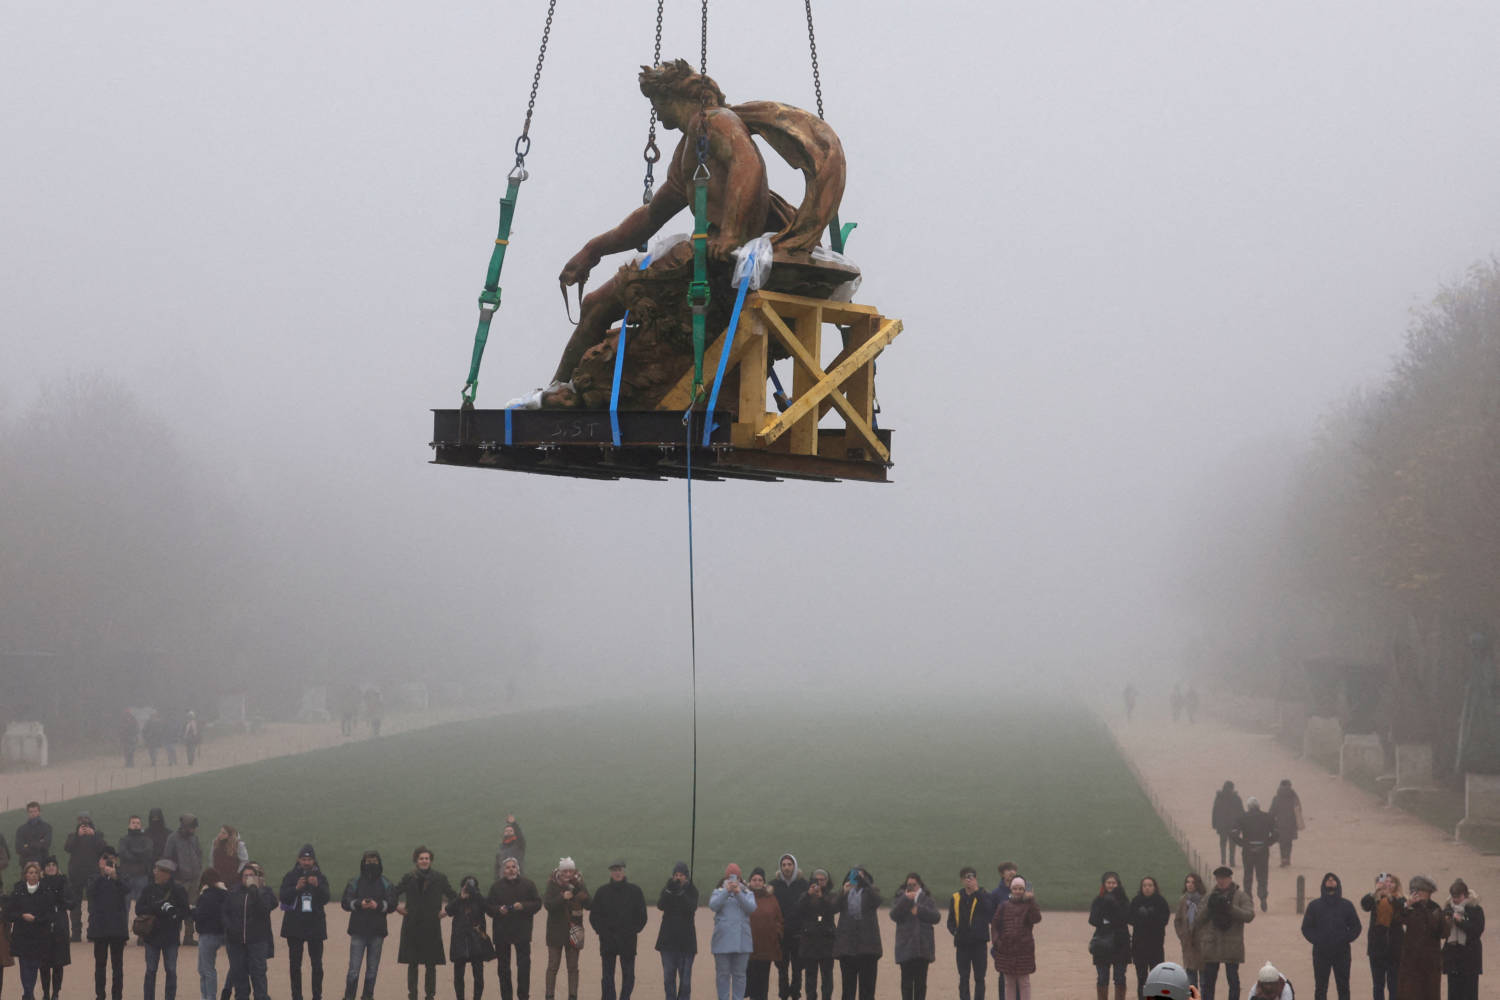 Restoration Of Apollon's Fountain Begins In The Palace Of Versailles